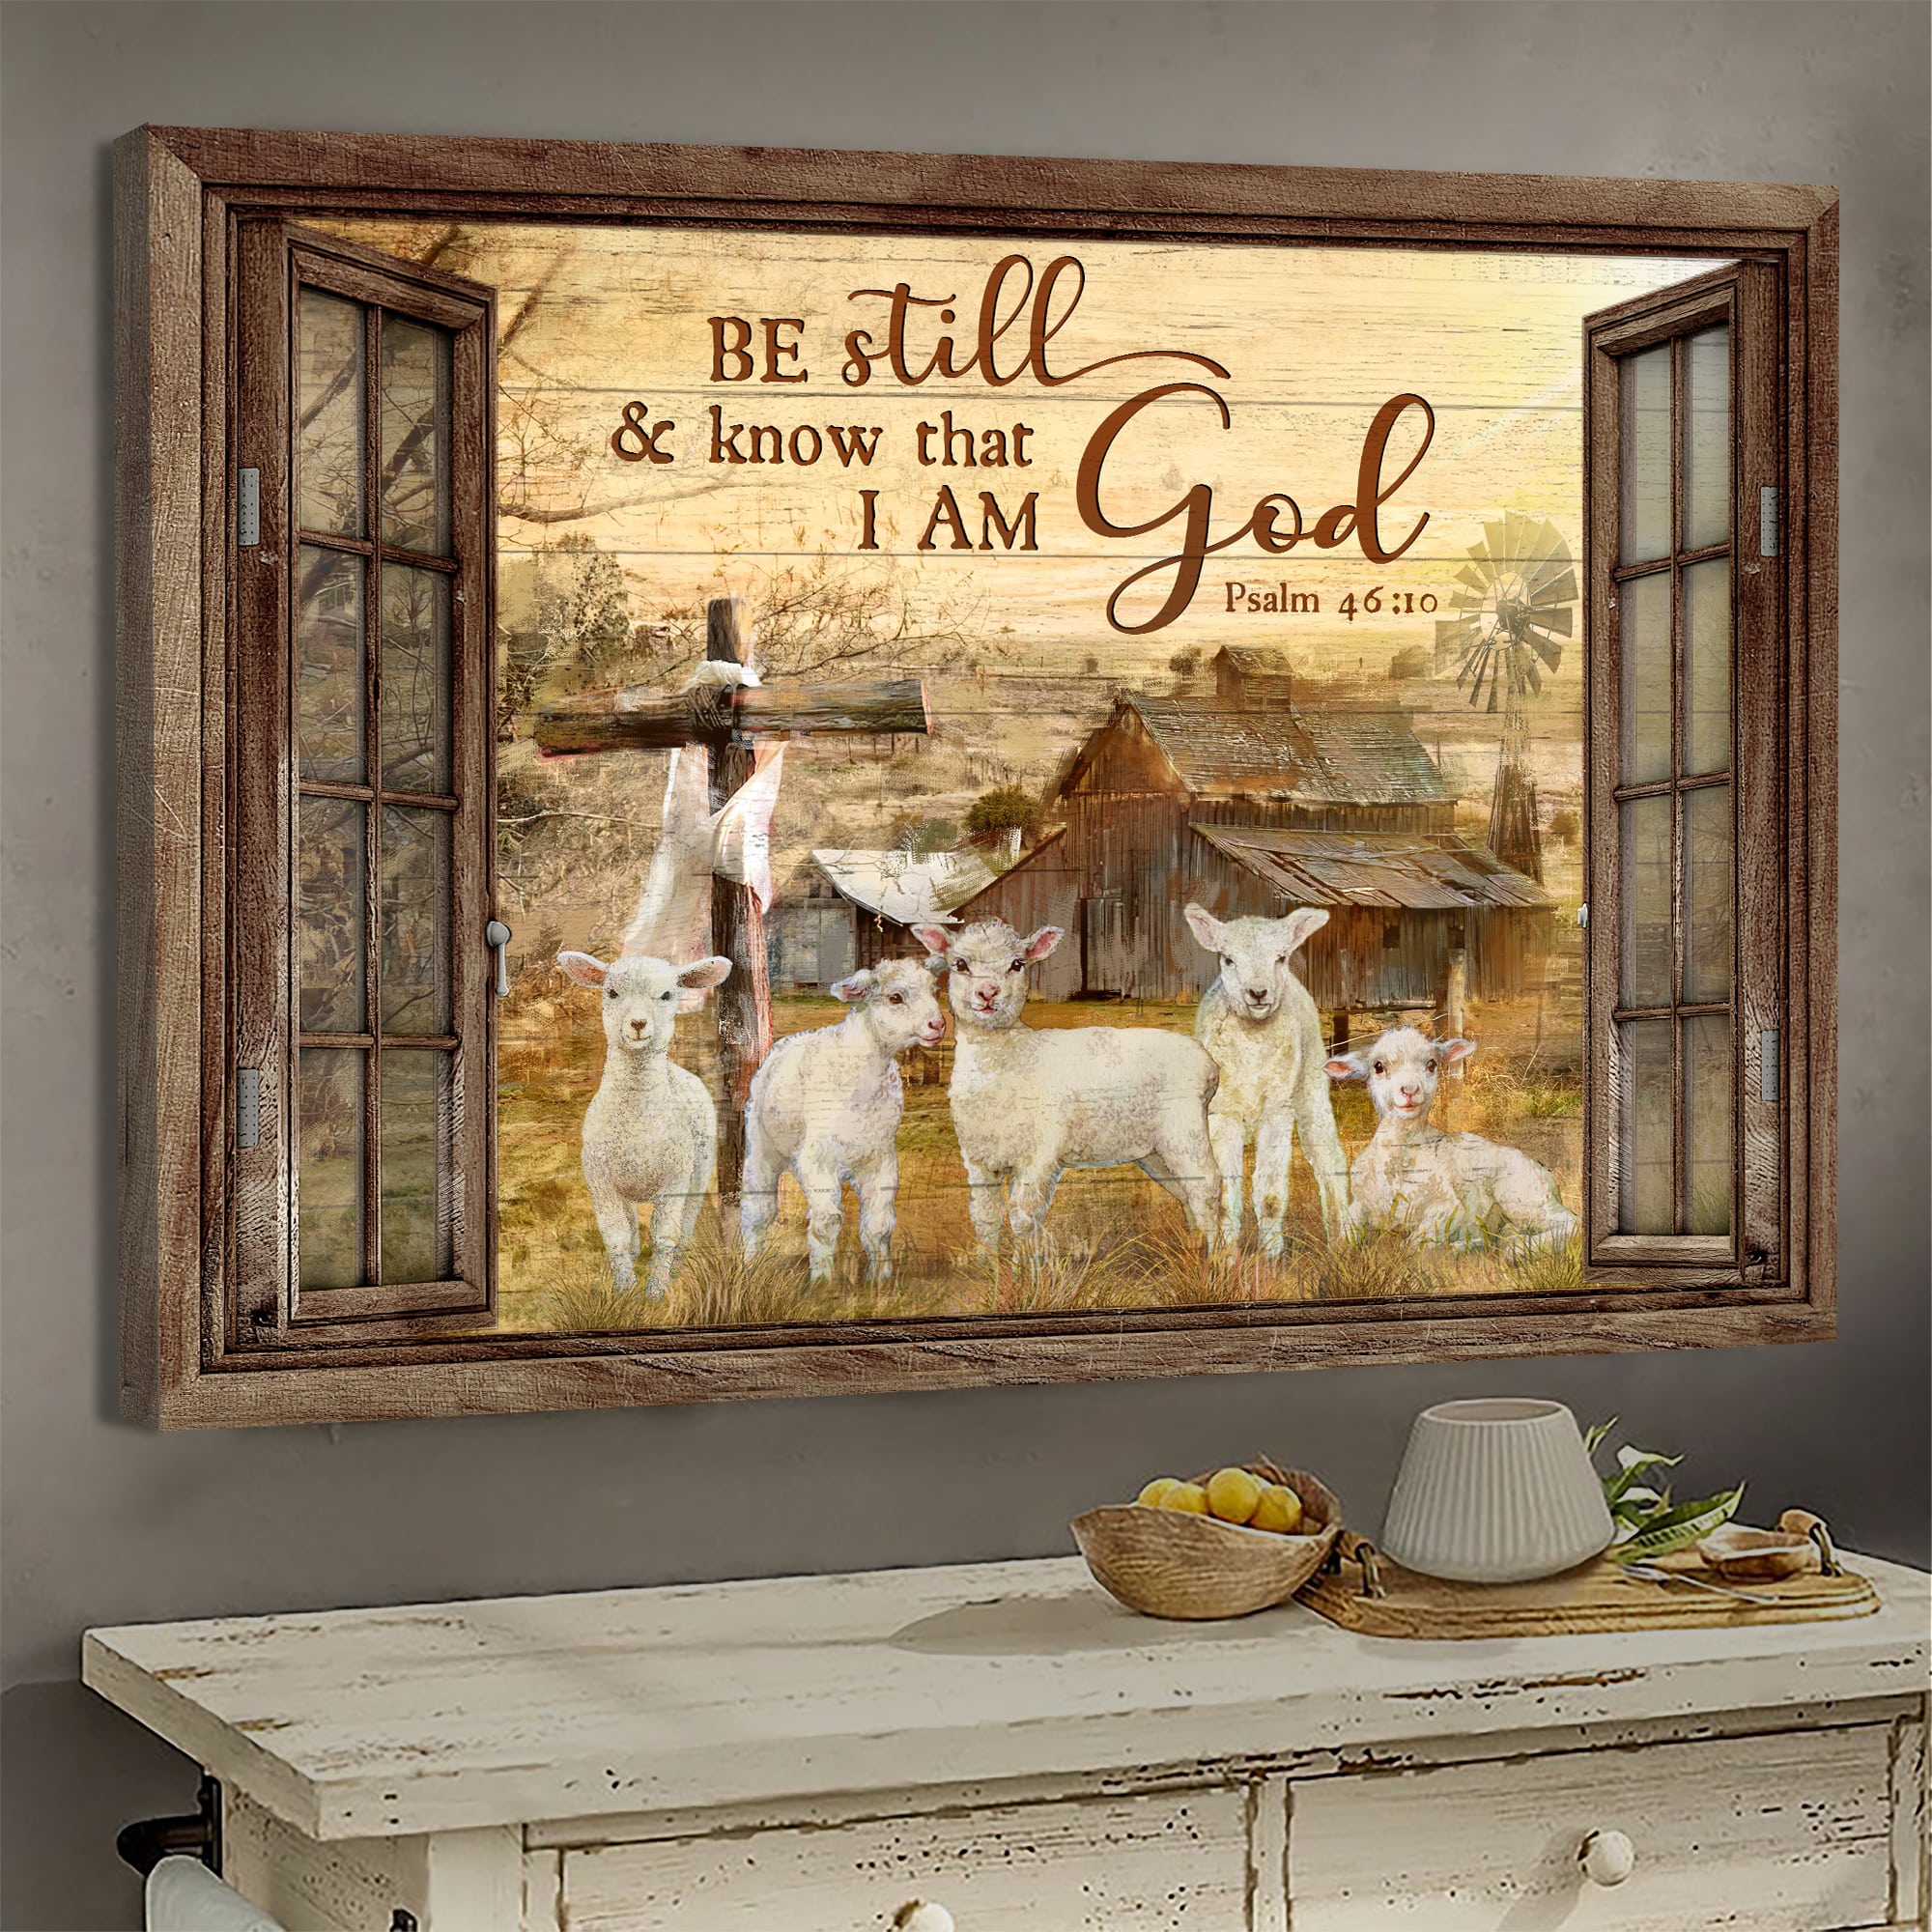 Window frame, The lambs of God, Old barn painting, Be still & know that I am God - Jesus Landscape Canvas Prints, Wall Art